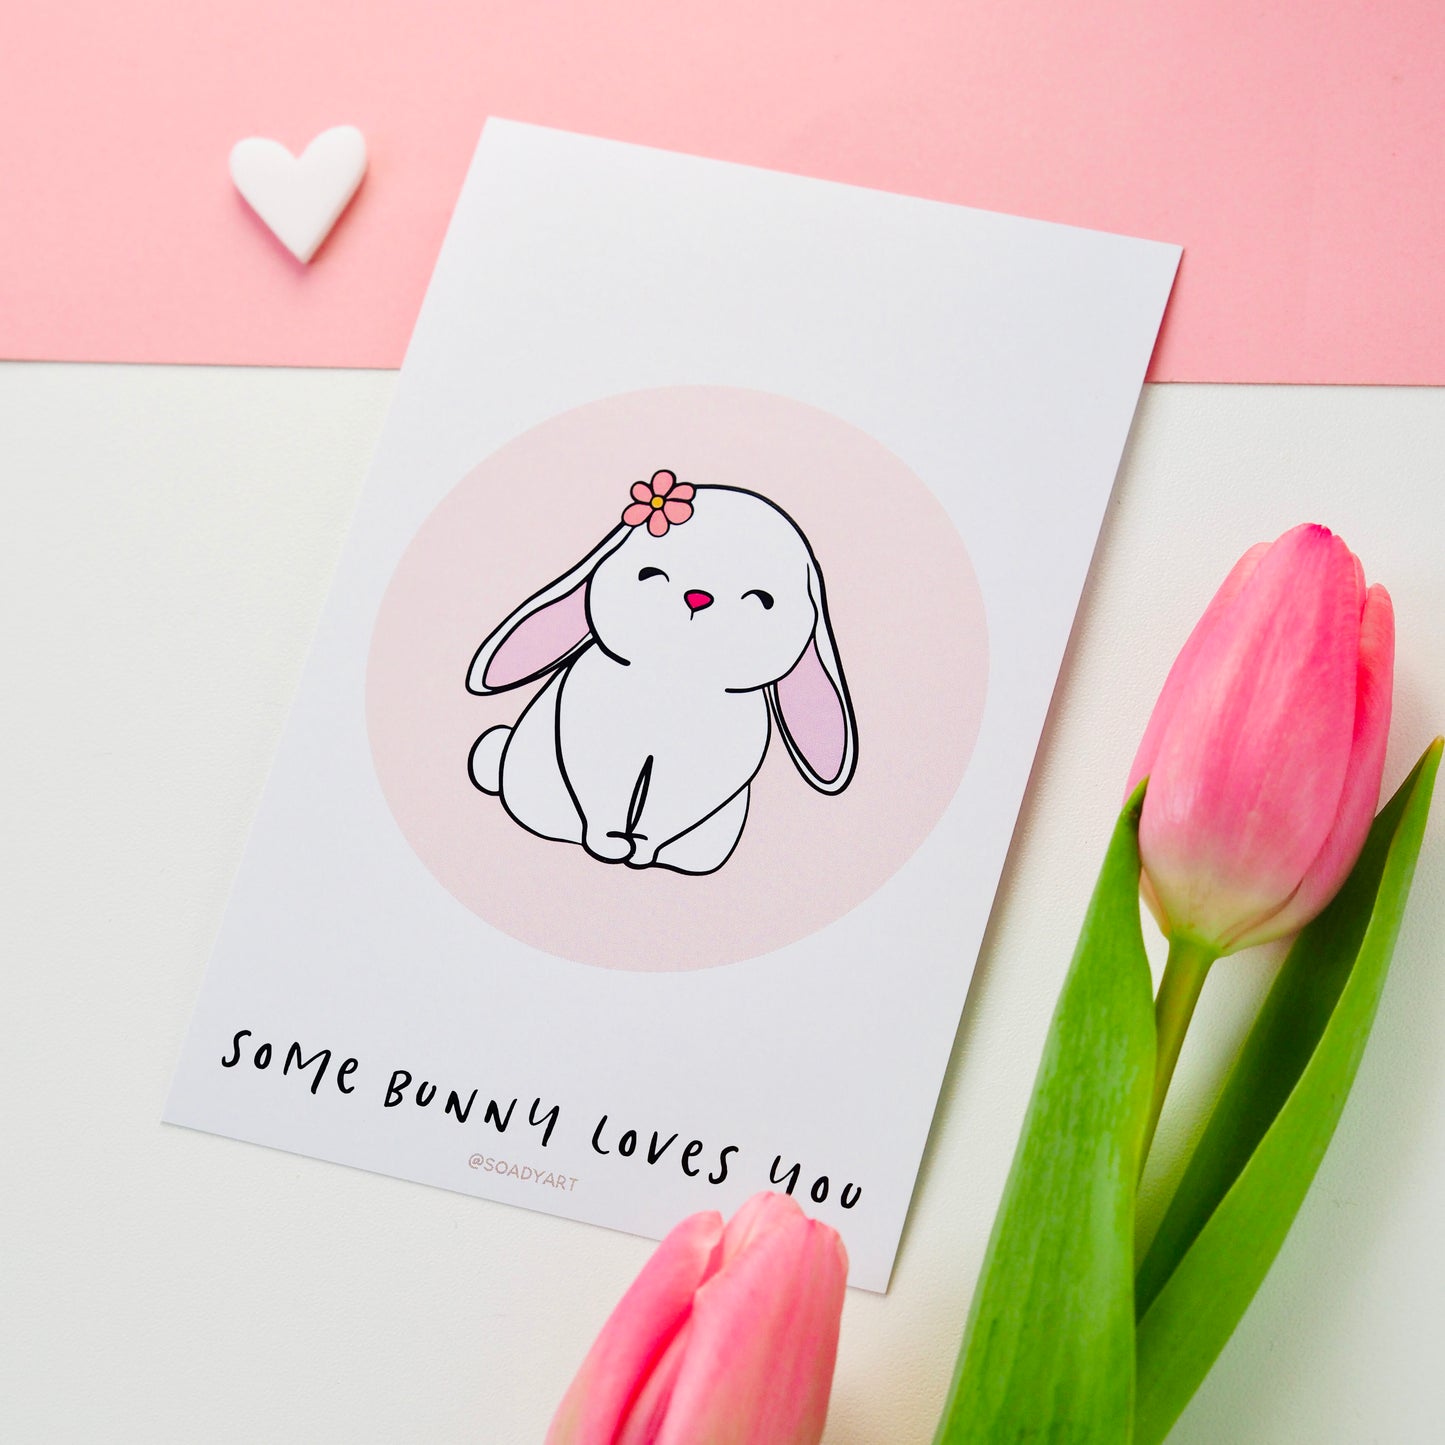 "Some bunny loves you" print